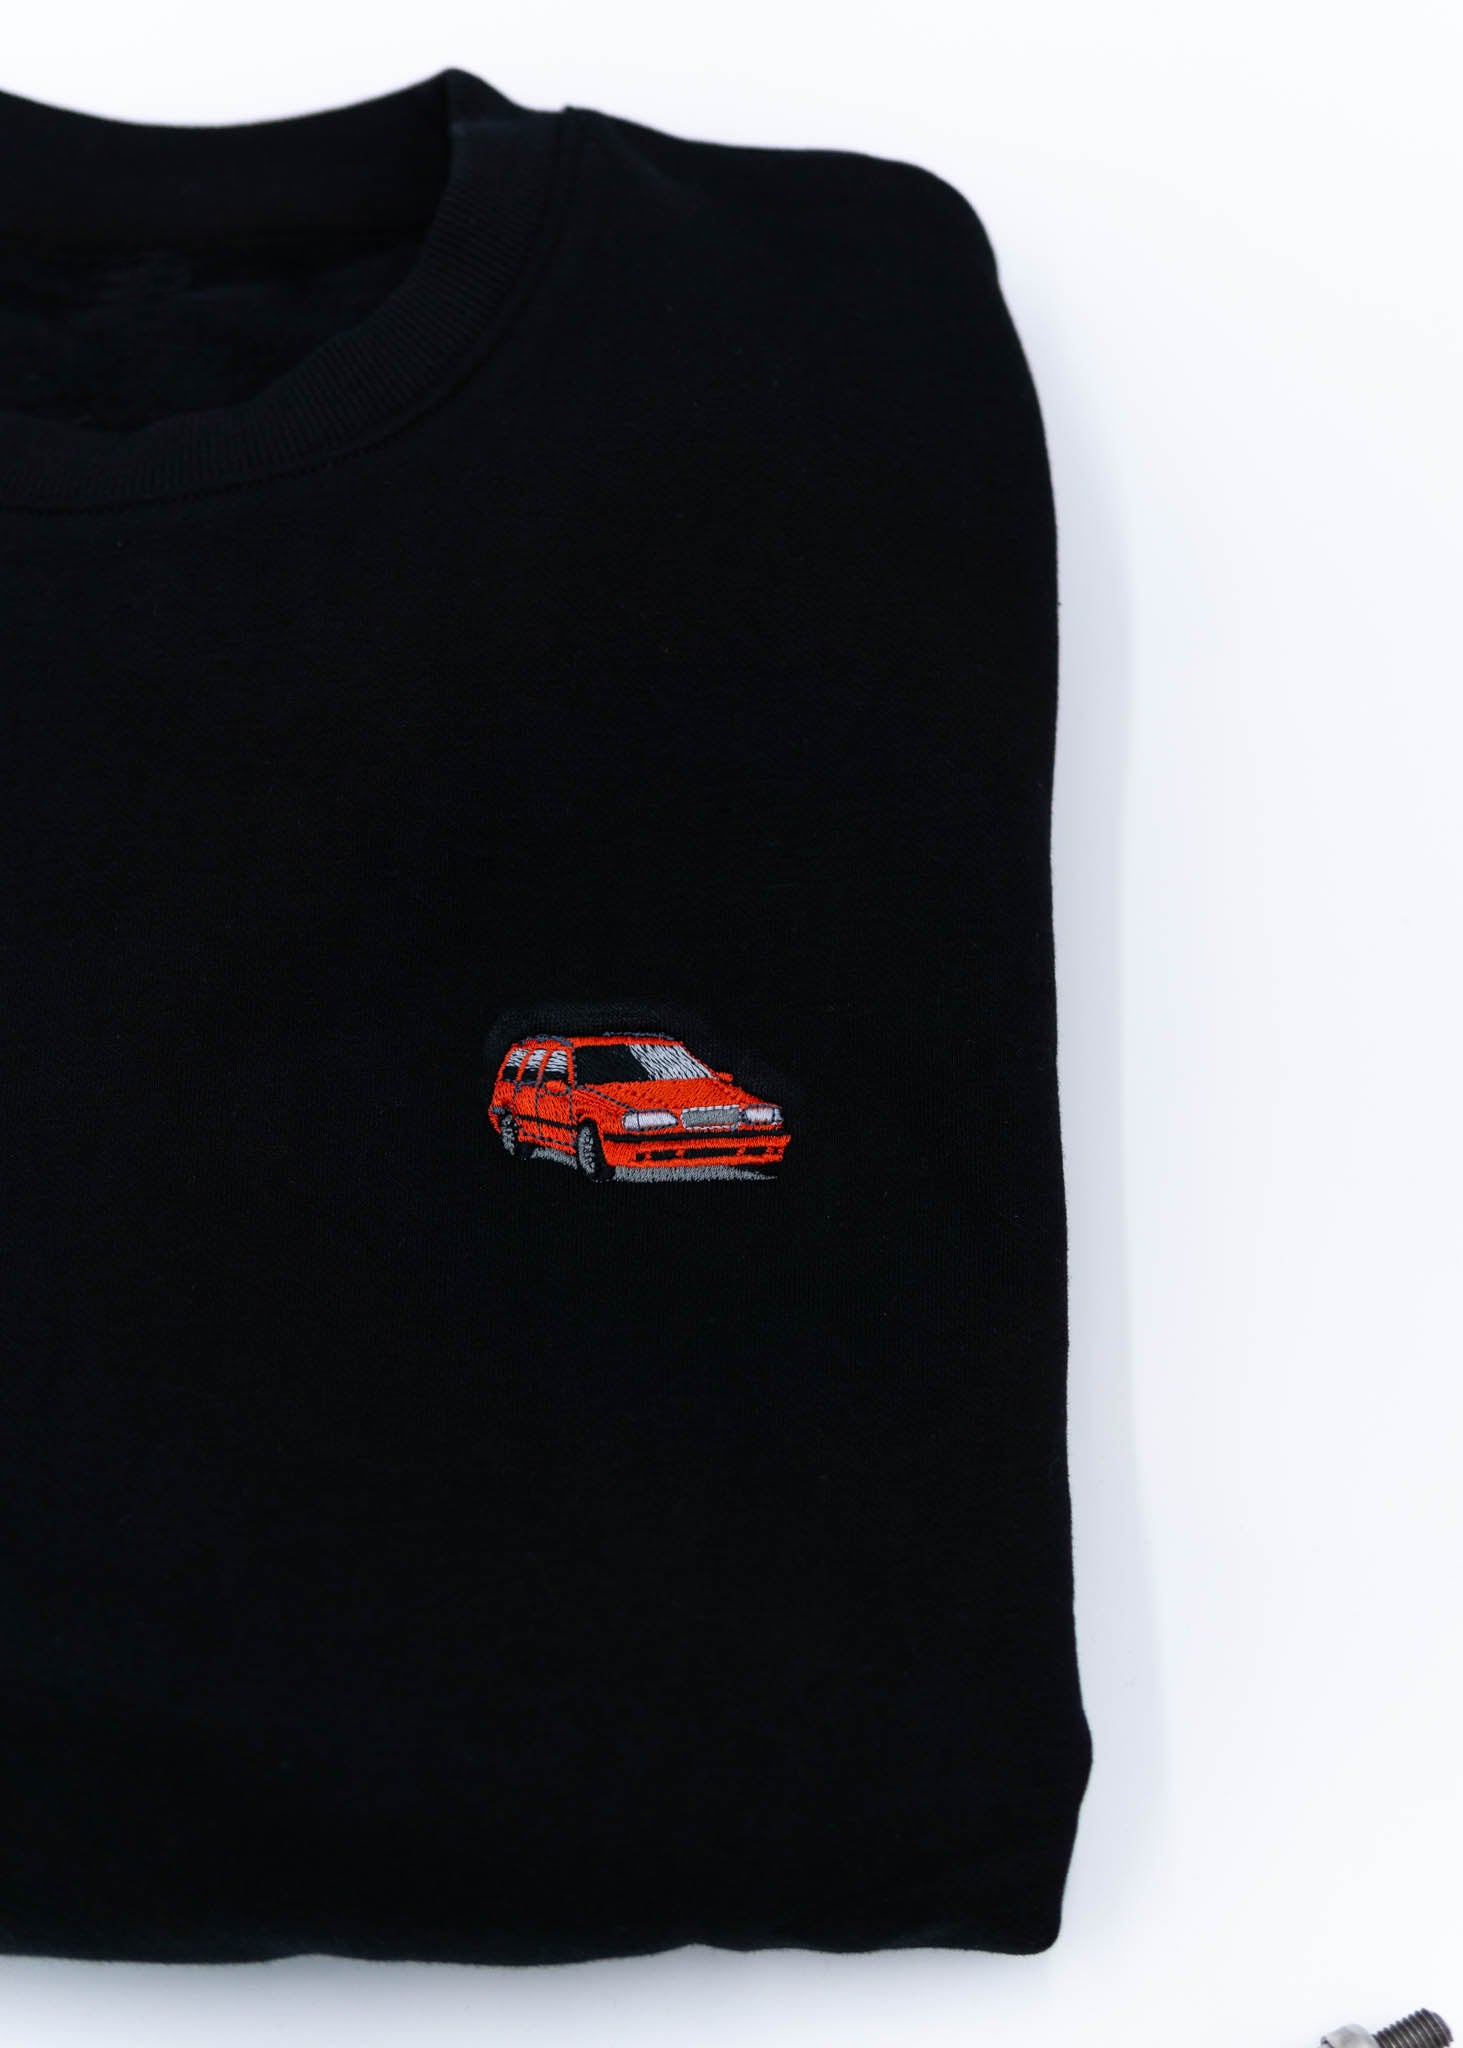 A black Volvo crewneck sweater for men. Photo is a close up of the sweater with an embroidered 850R. Fabric is composed of high quality 80% cotton, and 20% polyester and fits to size. The style is long sleeve, crew neck, and embroidery on left chest.